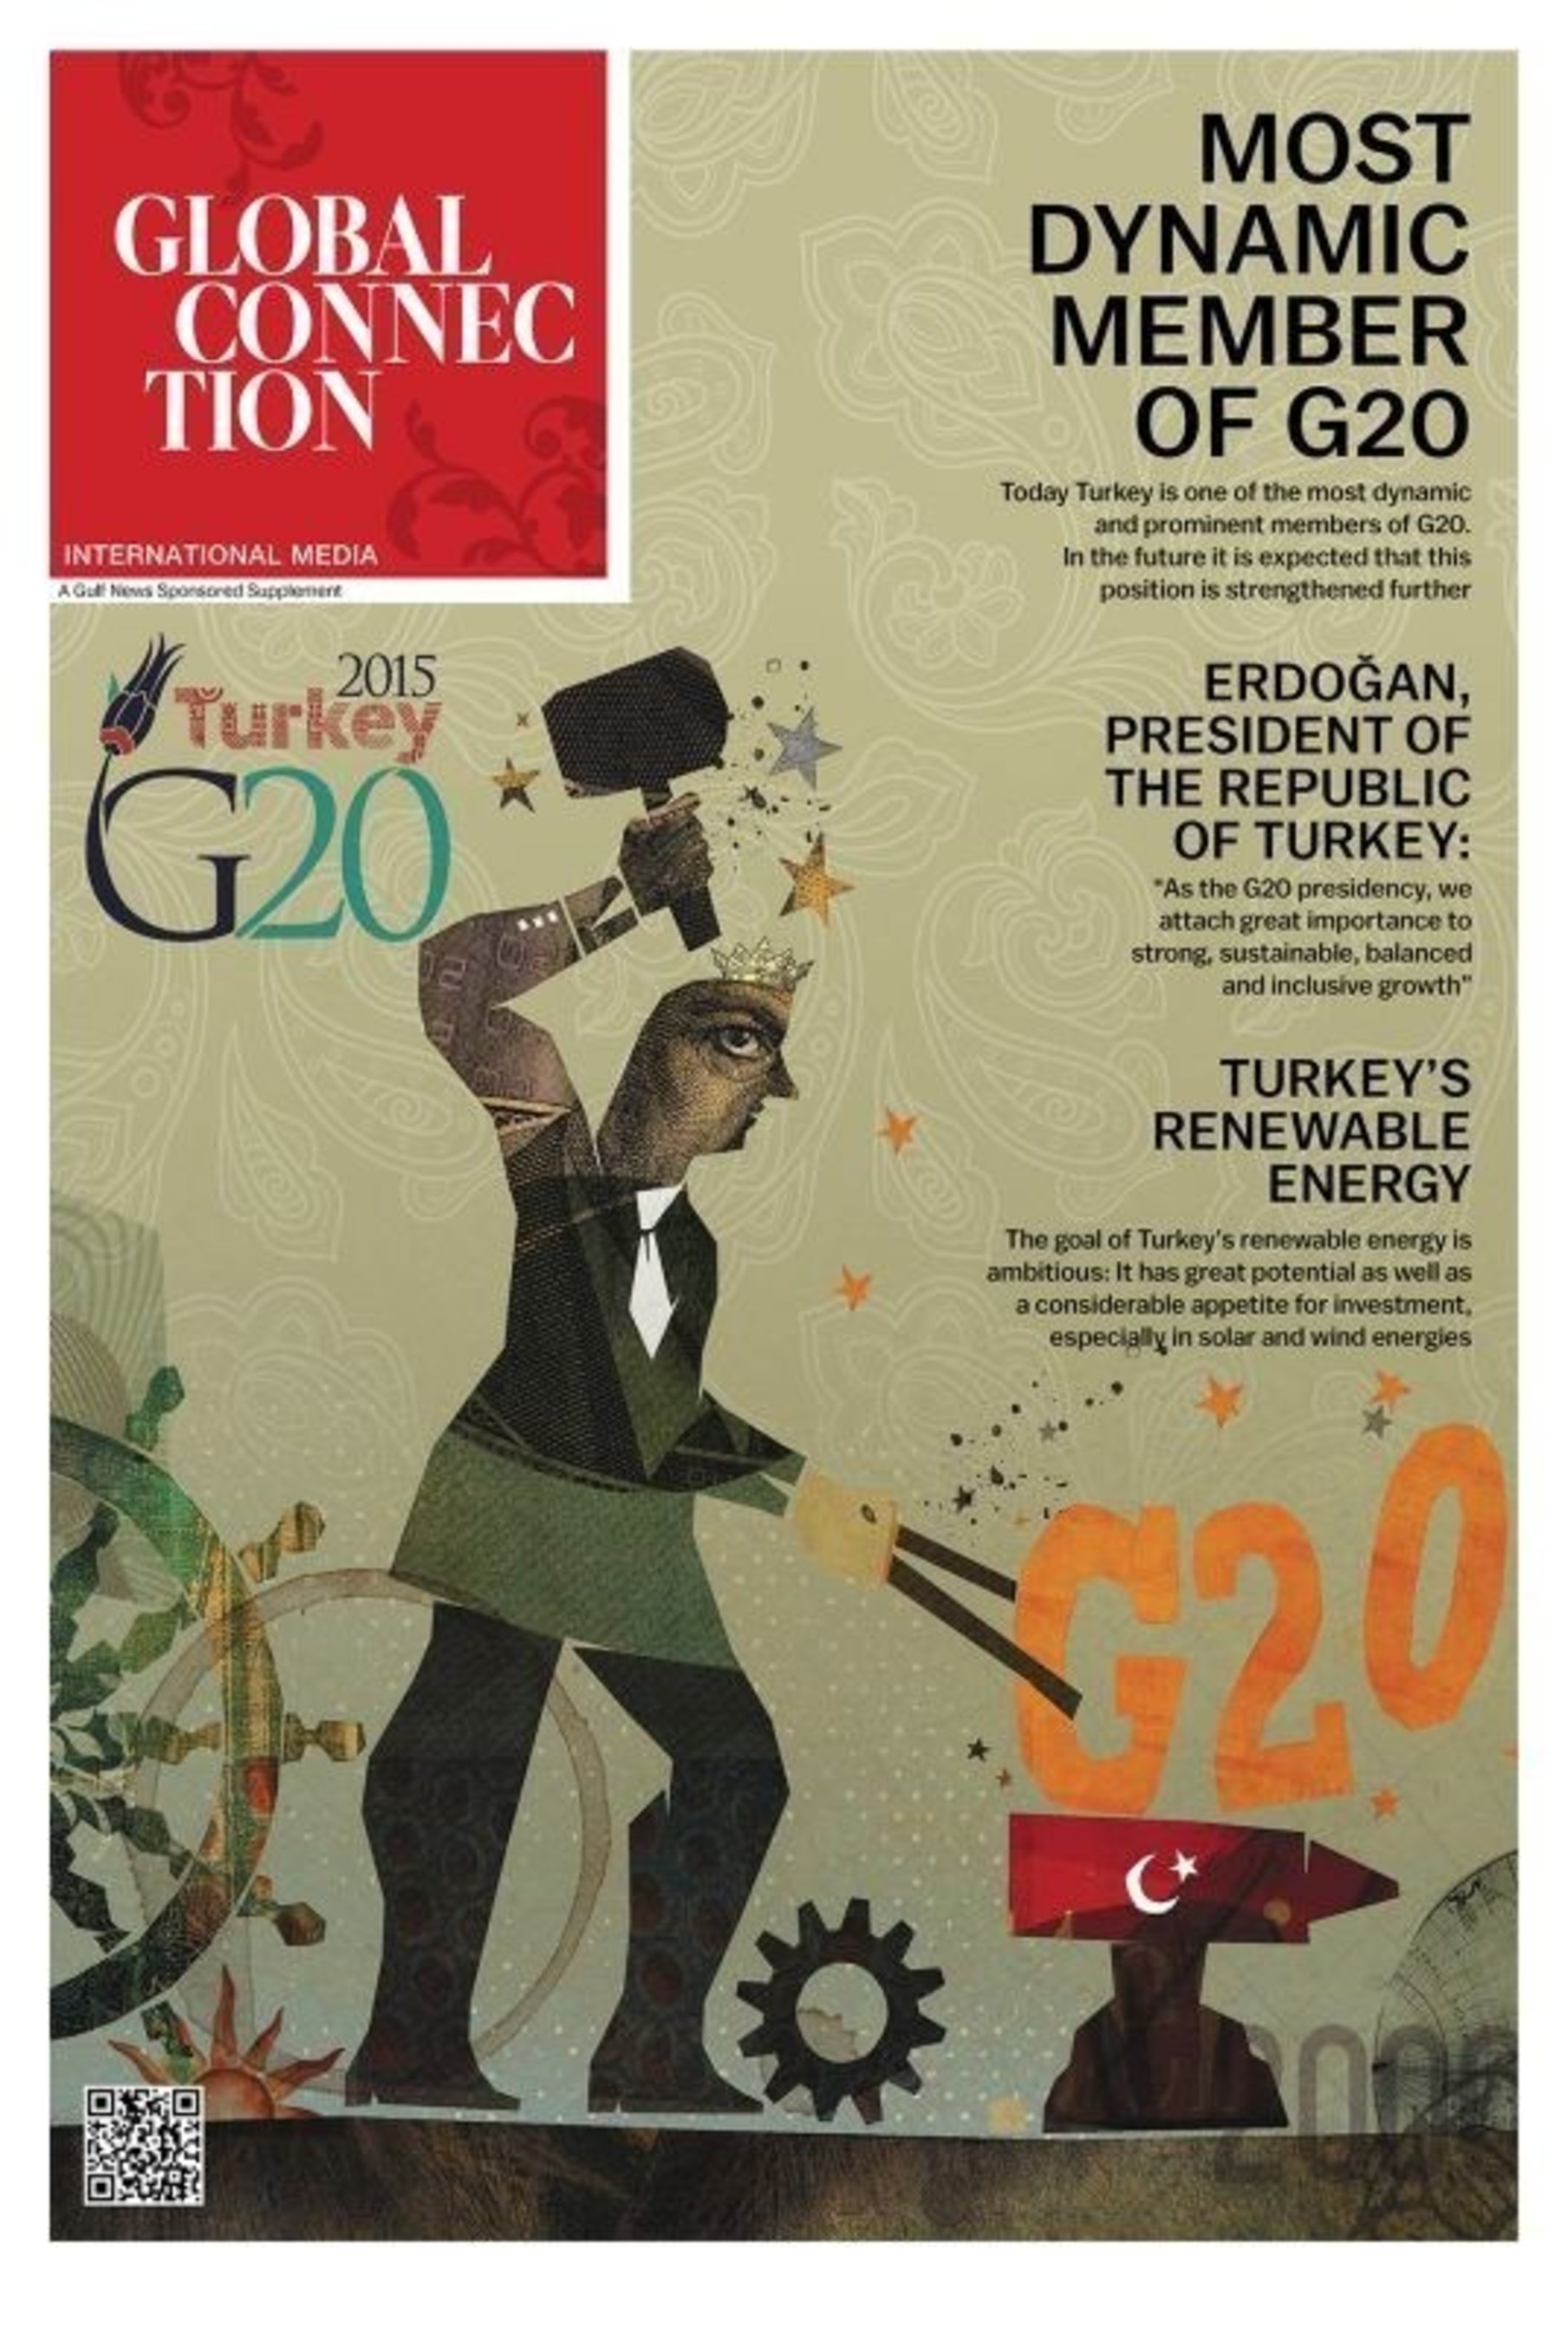 Edited by Global Connection, the first issue of "G20 in Turkey", the official publication of G20, has been published on 17 October 2015 together with The Daily Telegraph in the UK, subsequently on 19 October 2015 with Komsomolskaya Pravda and Kommersant in Russia, with Gulf News in the United Arab Emirates, with Die Welt and Welt Kompakt in Germany, and on 20 October 2015 with Le Figaro in France. The paper will subsequently be published featuring new content on 9 November 2015 with Komsomolskaya Pravda and Kommersant in Russia. G20 news contents will also be found in their entirety on important online sites such as  www.kp.ru ,  www.welt.de and  www.lemonde.fr . (PRNewsFoto/Global Connection Media S.A.) (PRNewsFoto/Global Connection Media S.A.)